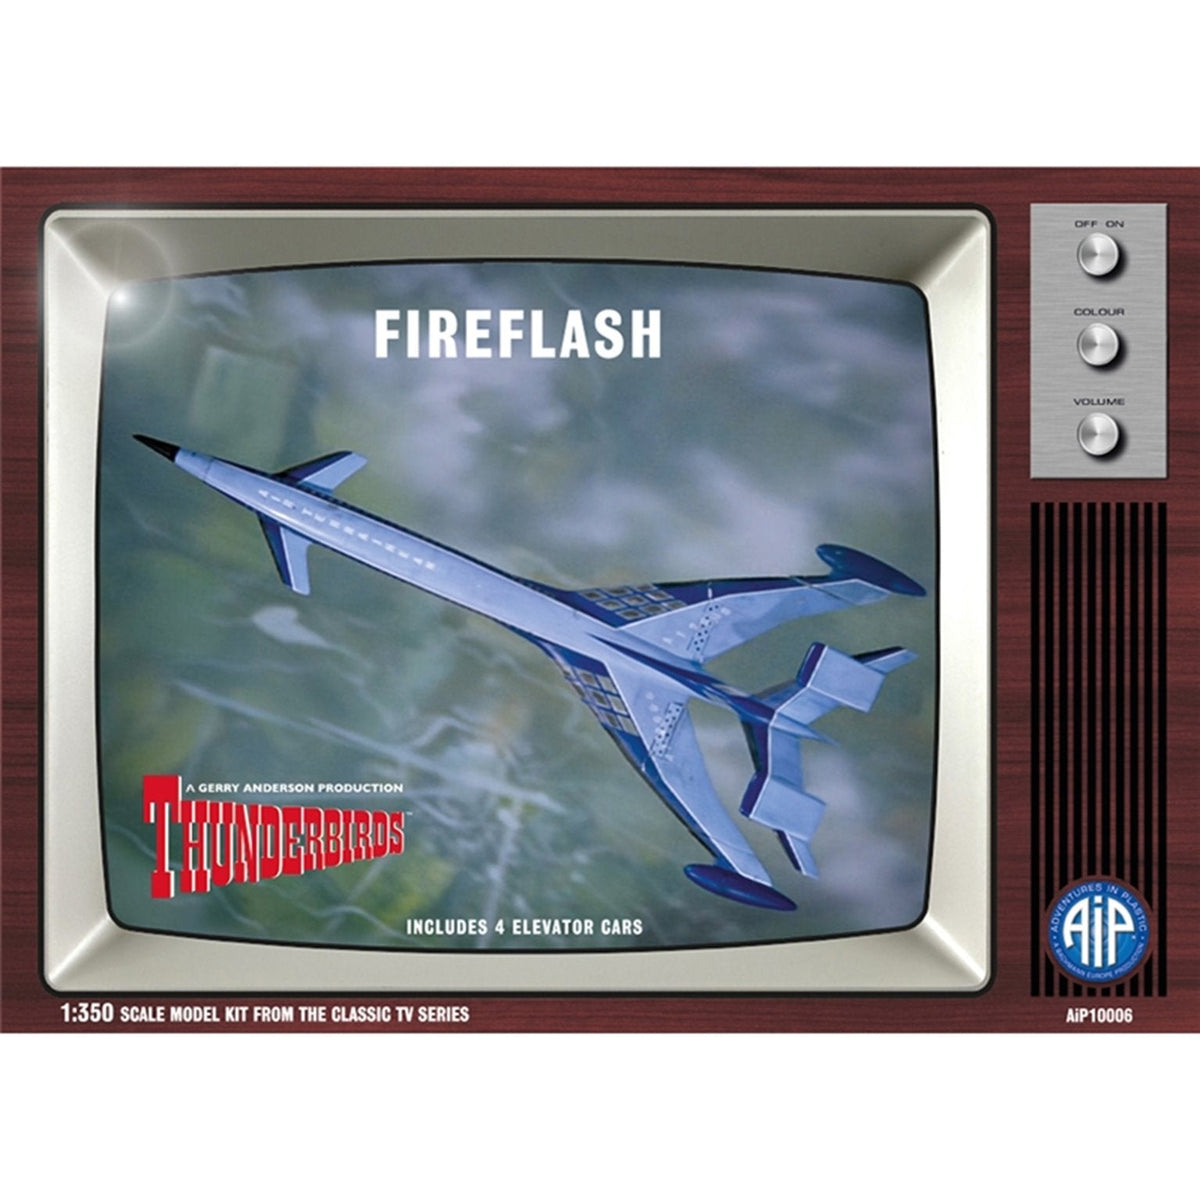 1:350 Fireflash Model Kit - The Gerry Anderson Store